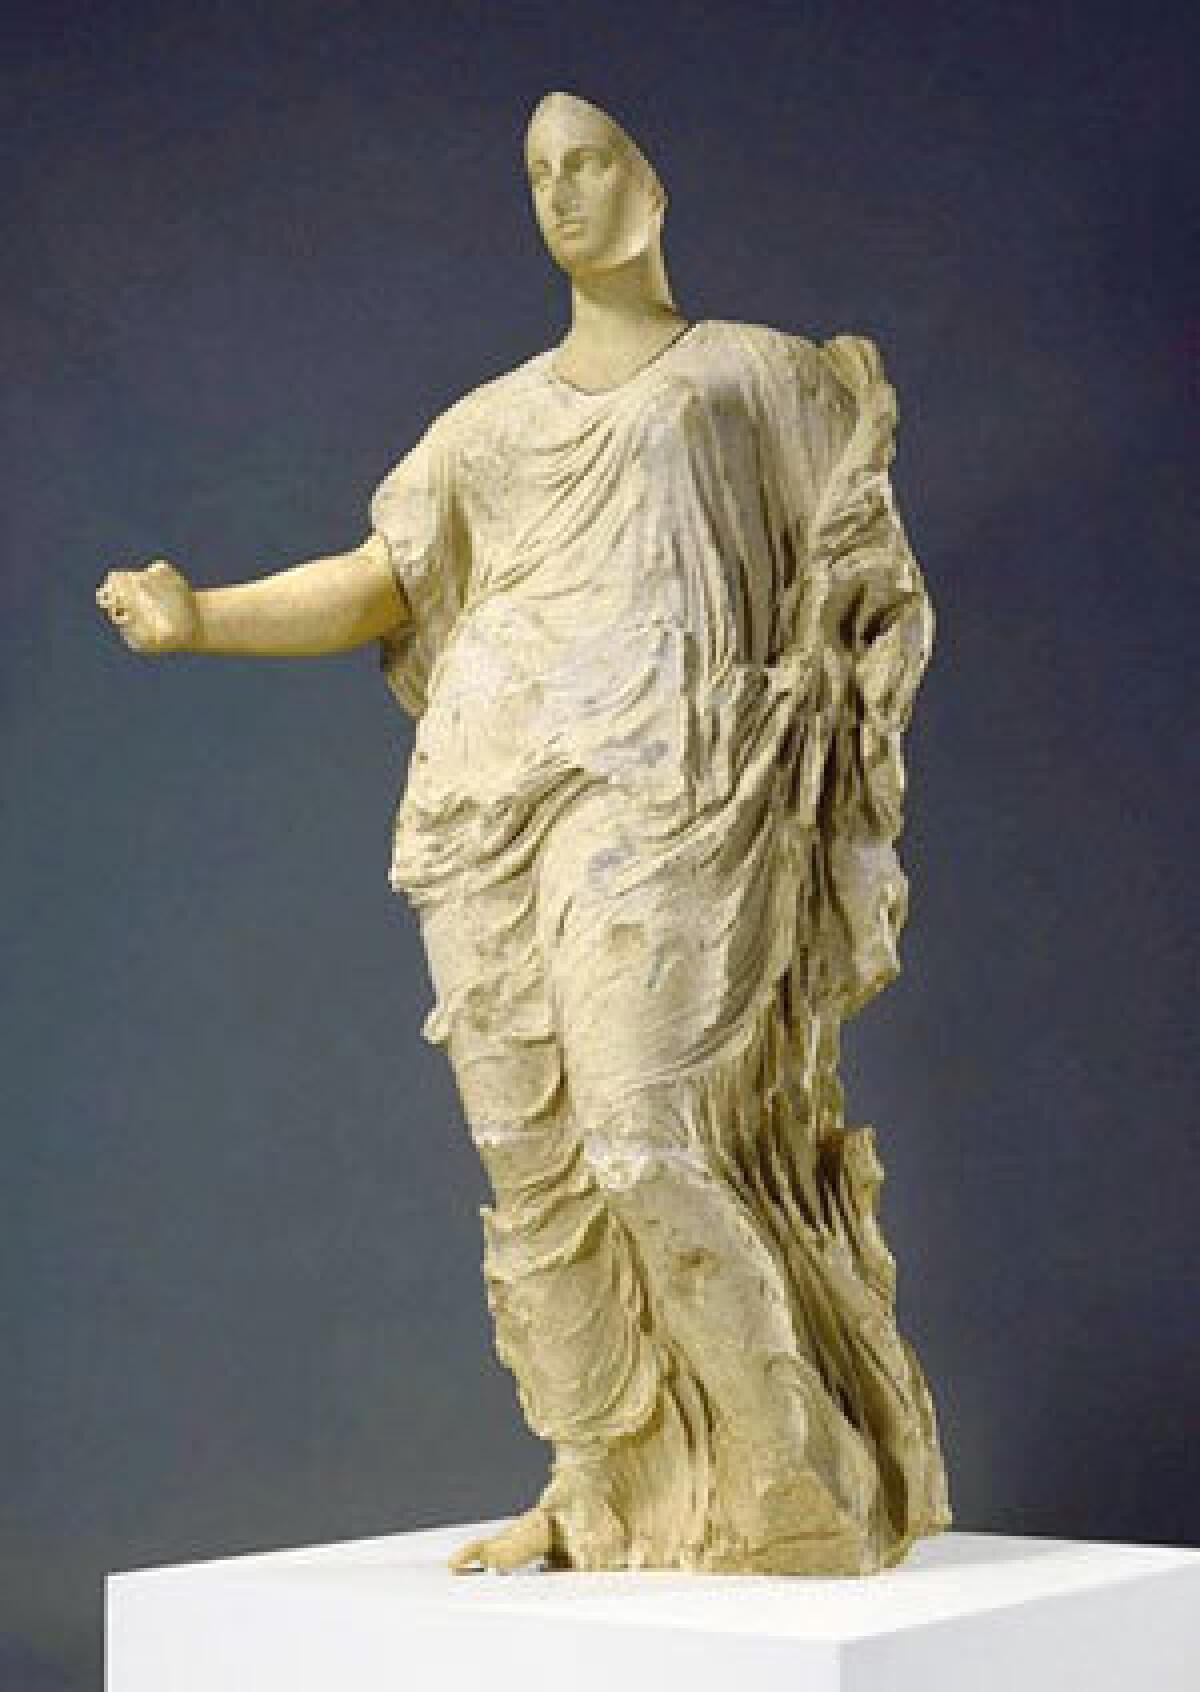 The Getty paid $18 million for the Aphrodite statue in 1988, but its questionable origin dogged the museum.